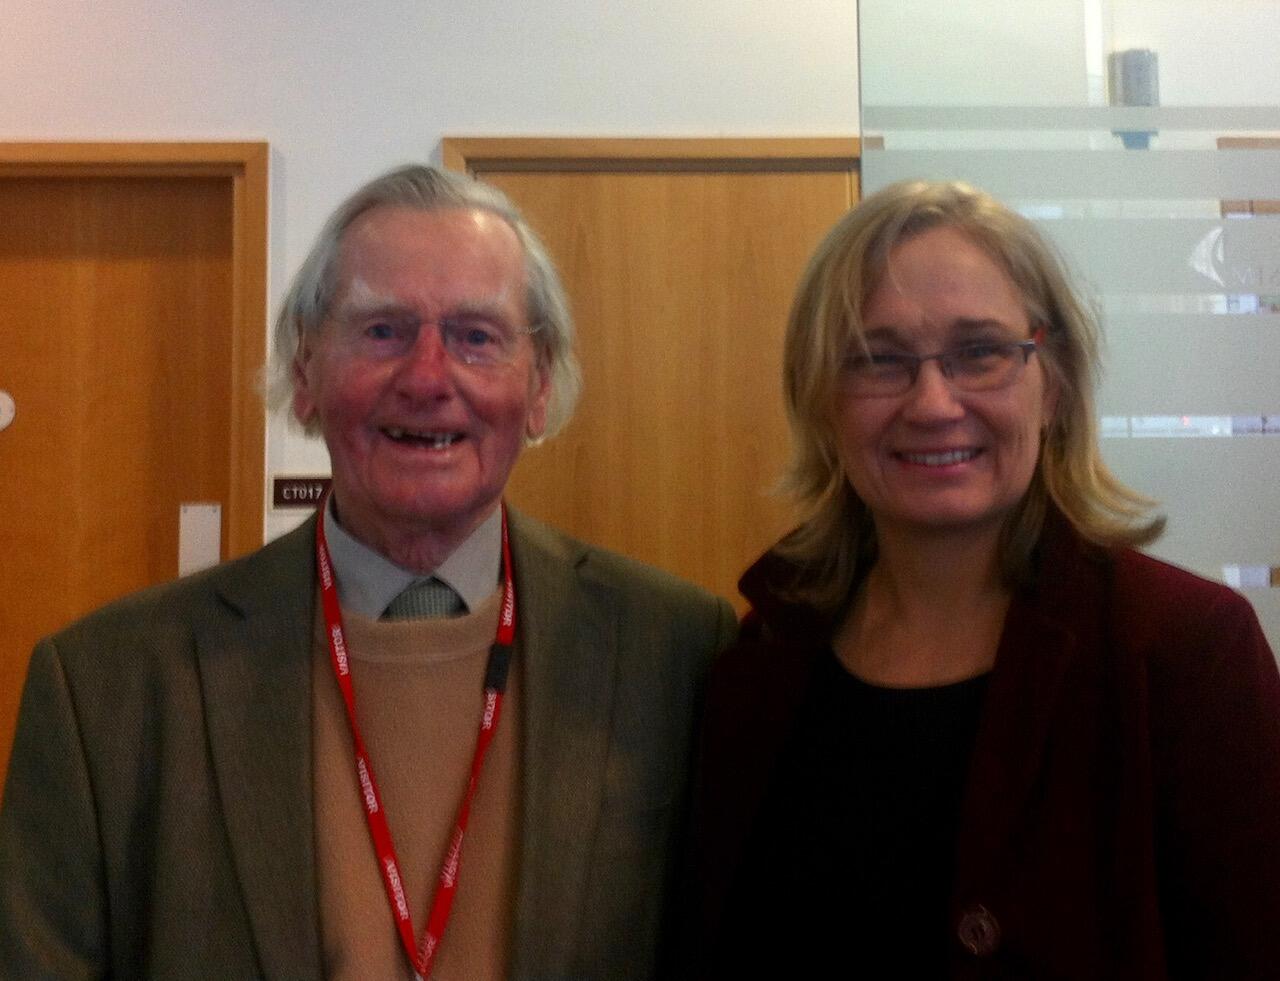 Dr Crewe with LSTM's Dr Louise Kelly-Hope in 2013